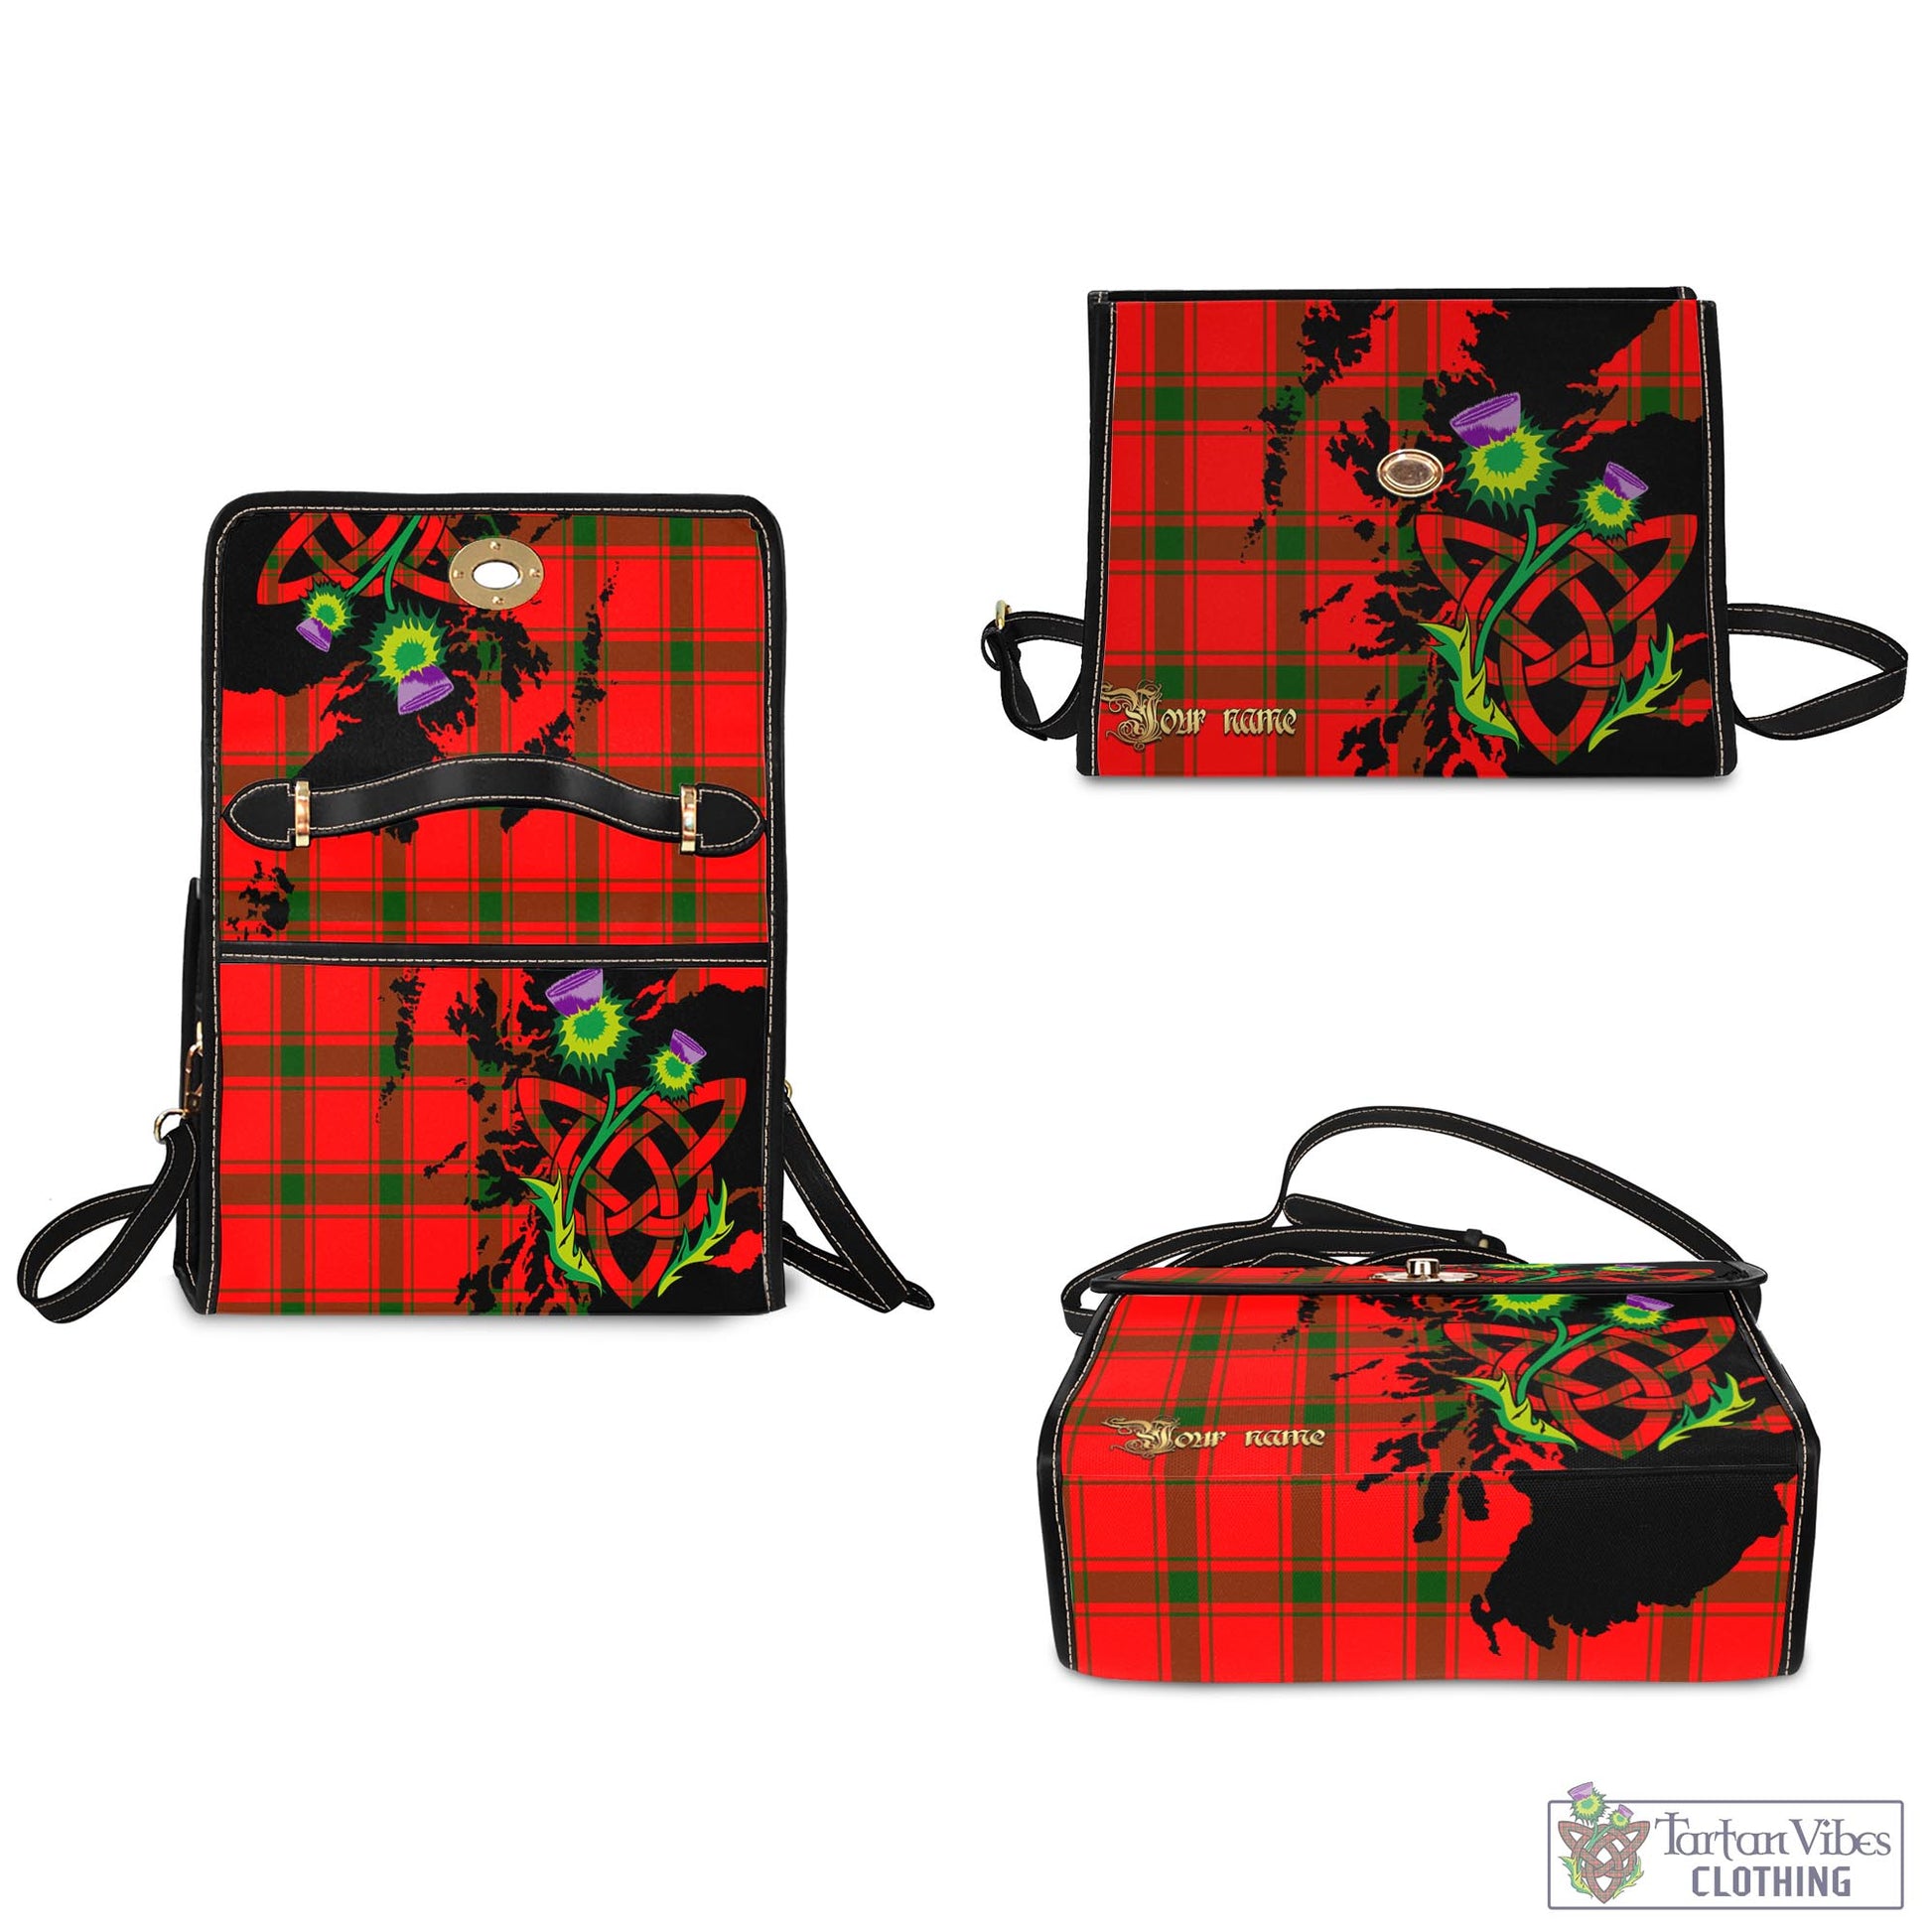 Tartan Vibes Clothing Darroch Tartan Waterproof Canvas Bag with Scotland Map and Thistle Celtic Accents